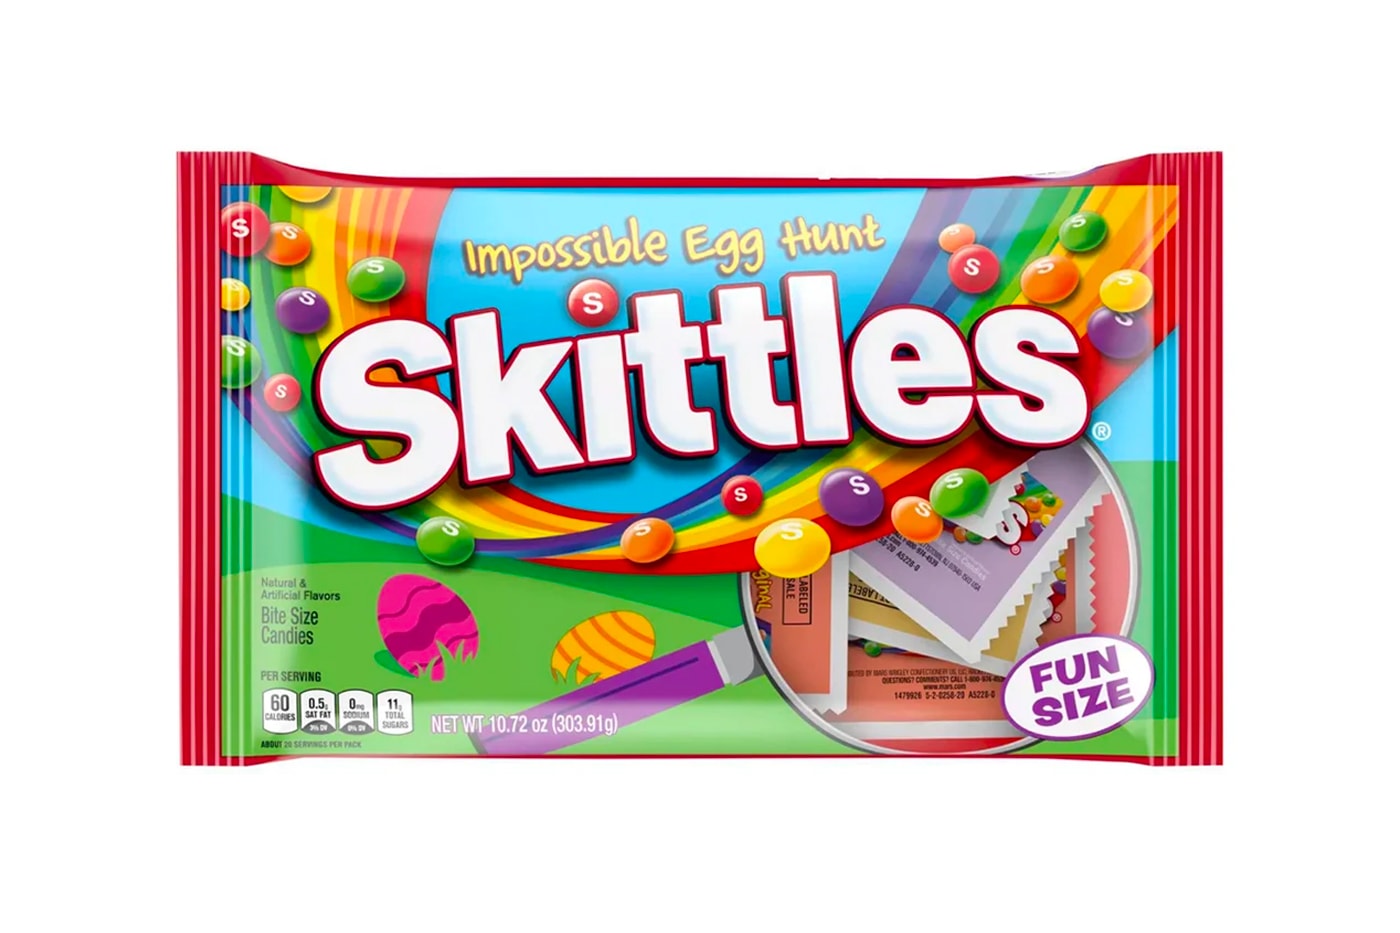 Skittles Impossible Egg Hunt release news East Hunt Candy Food Snacks Target Chewable candy Camouflage taste the rainbow 